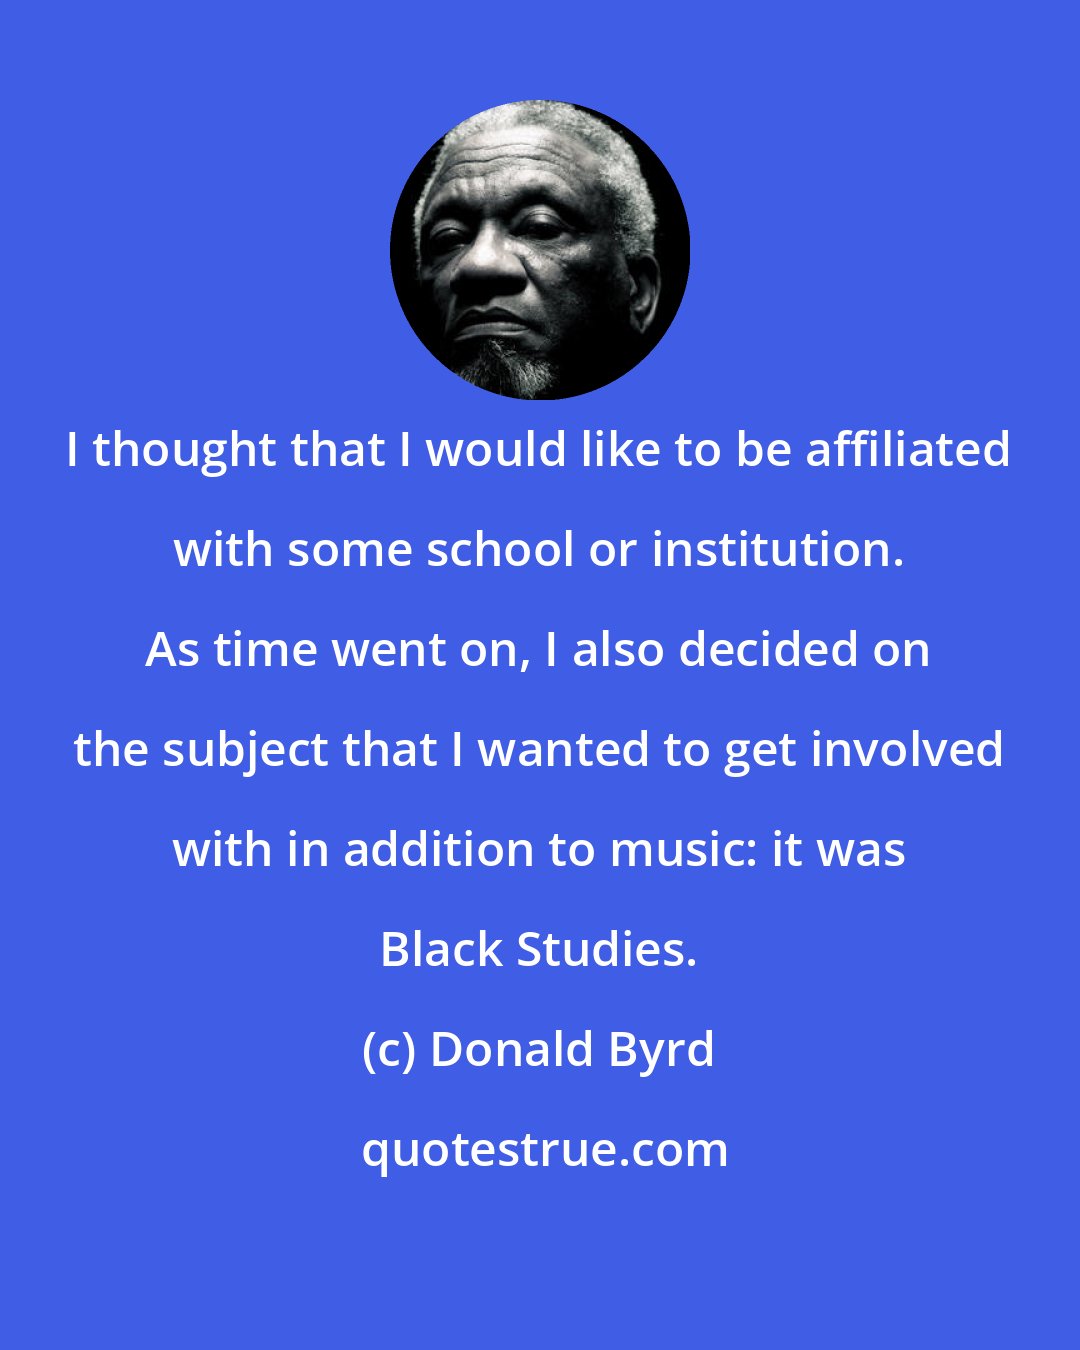 Donald Byrd: I thought that I would like to be affiliated with some school or institution. As time went on, I also decided on the subject that I wanted to get involved with in addition to music: it was Black Studies.